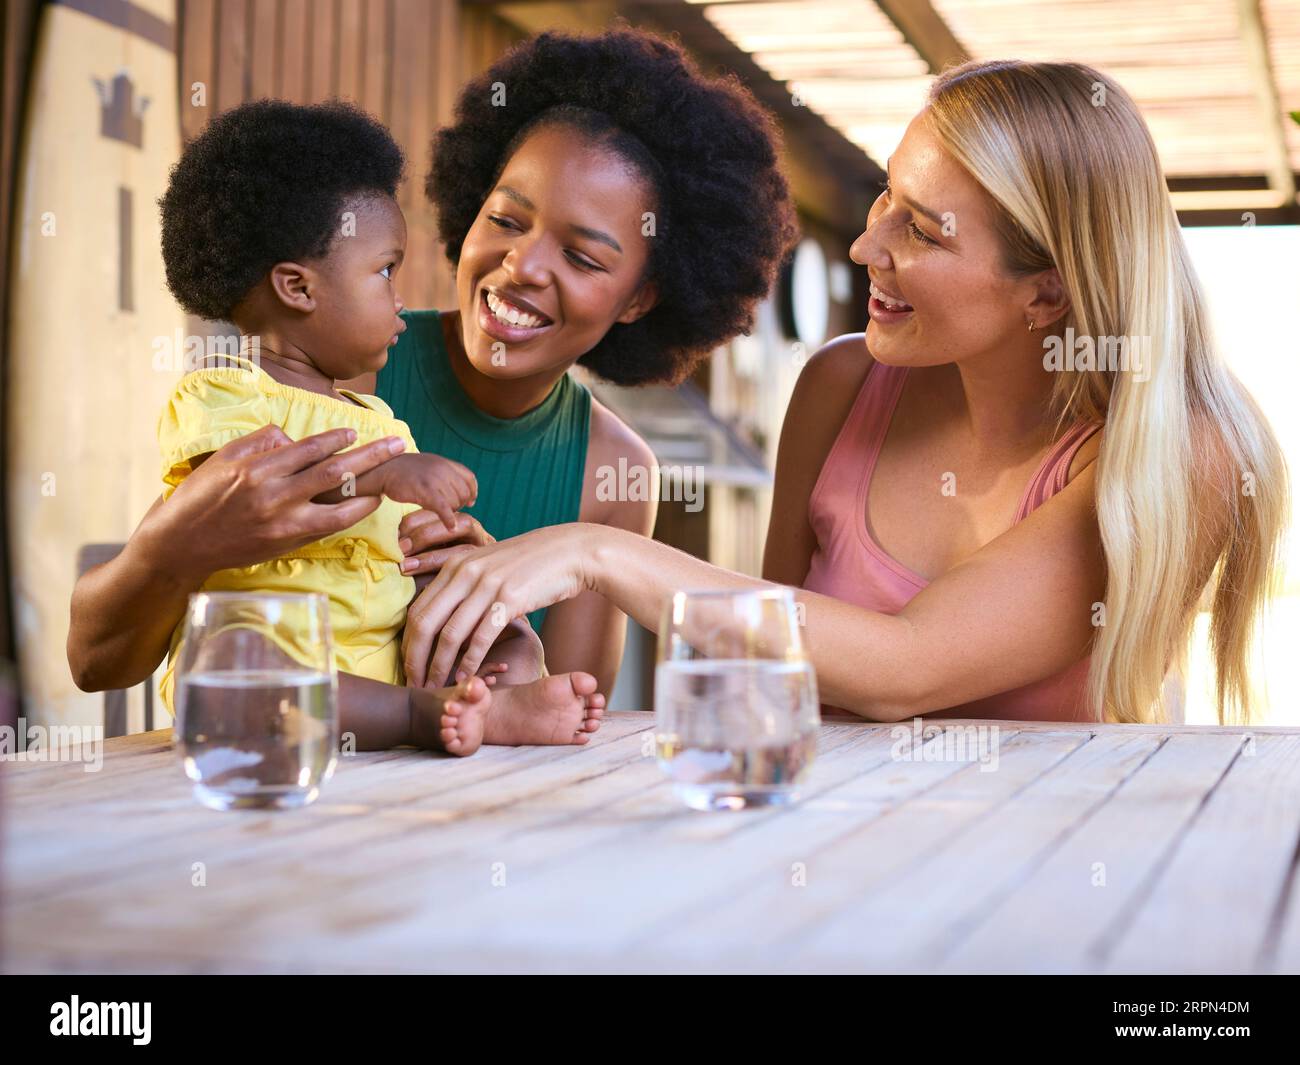 Same Sex Family With Two Mums Playing With Young Daughter Outdoors At Home Stock Photo